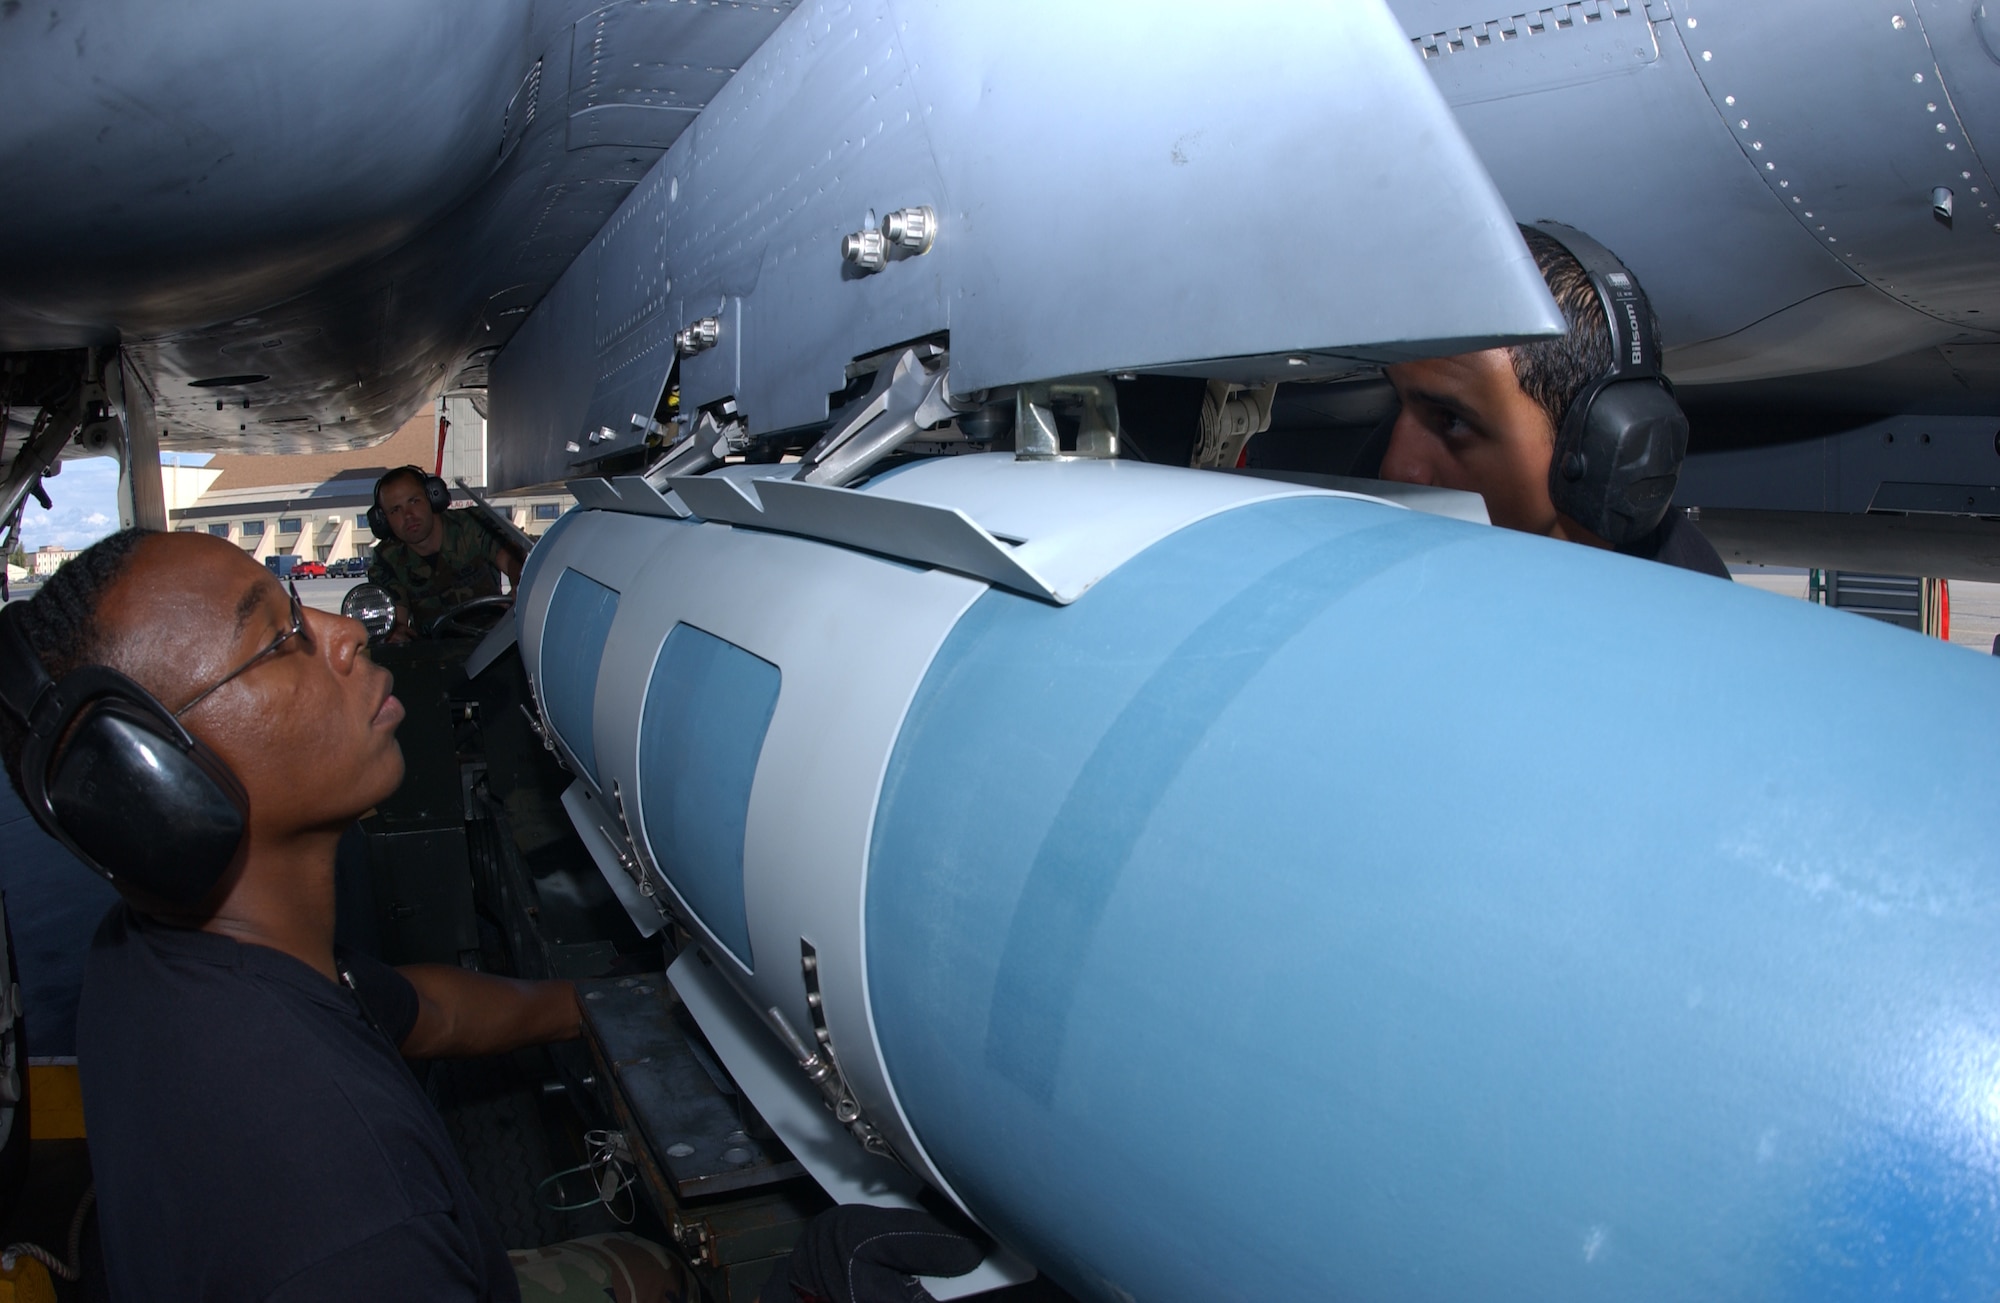 EIELSON AIR FORCE BASE, Alaska -- Staff Sgt. Ray Saunders (Left), Airman 1st Class Santiago Mosquera (Right), and Airman 1st Class Scott Perish (Back), weapons armament system specialists, 4th Aircraft Maintenance Squadron, Seymour Johnson Air Force Base, N.C., loads a GBU-31 bomb onto an F-15 Strike Eagle, 335th Fighter Squadron, Seymour Johnson Air Force Base, in front of the Thunderdome on July 24 during Red Flag-Alaska 07-3. This exercise provides a real-world training environment for maintenance and support personnel through the duration of RF-A. (U.S. Air Force Photo by Airman 1st Class Jonathan Snyder)